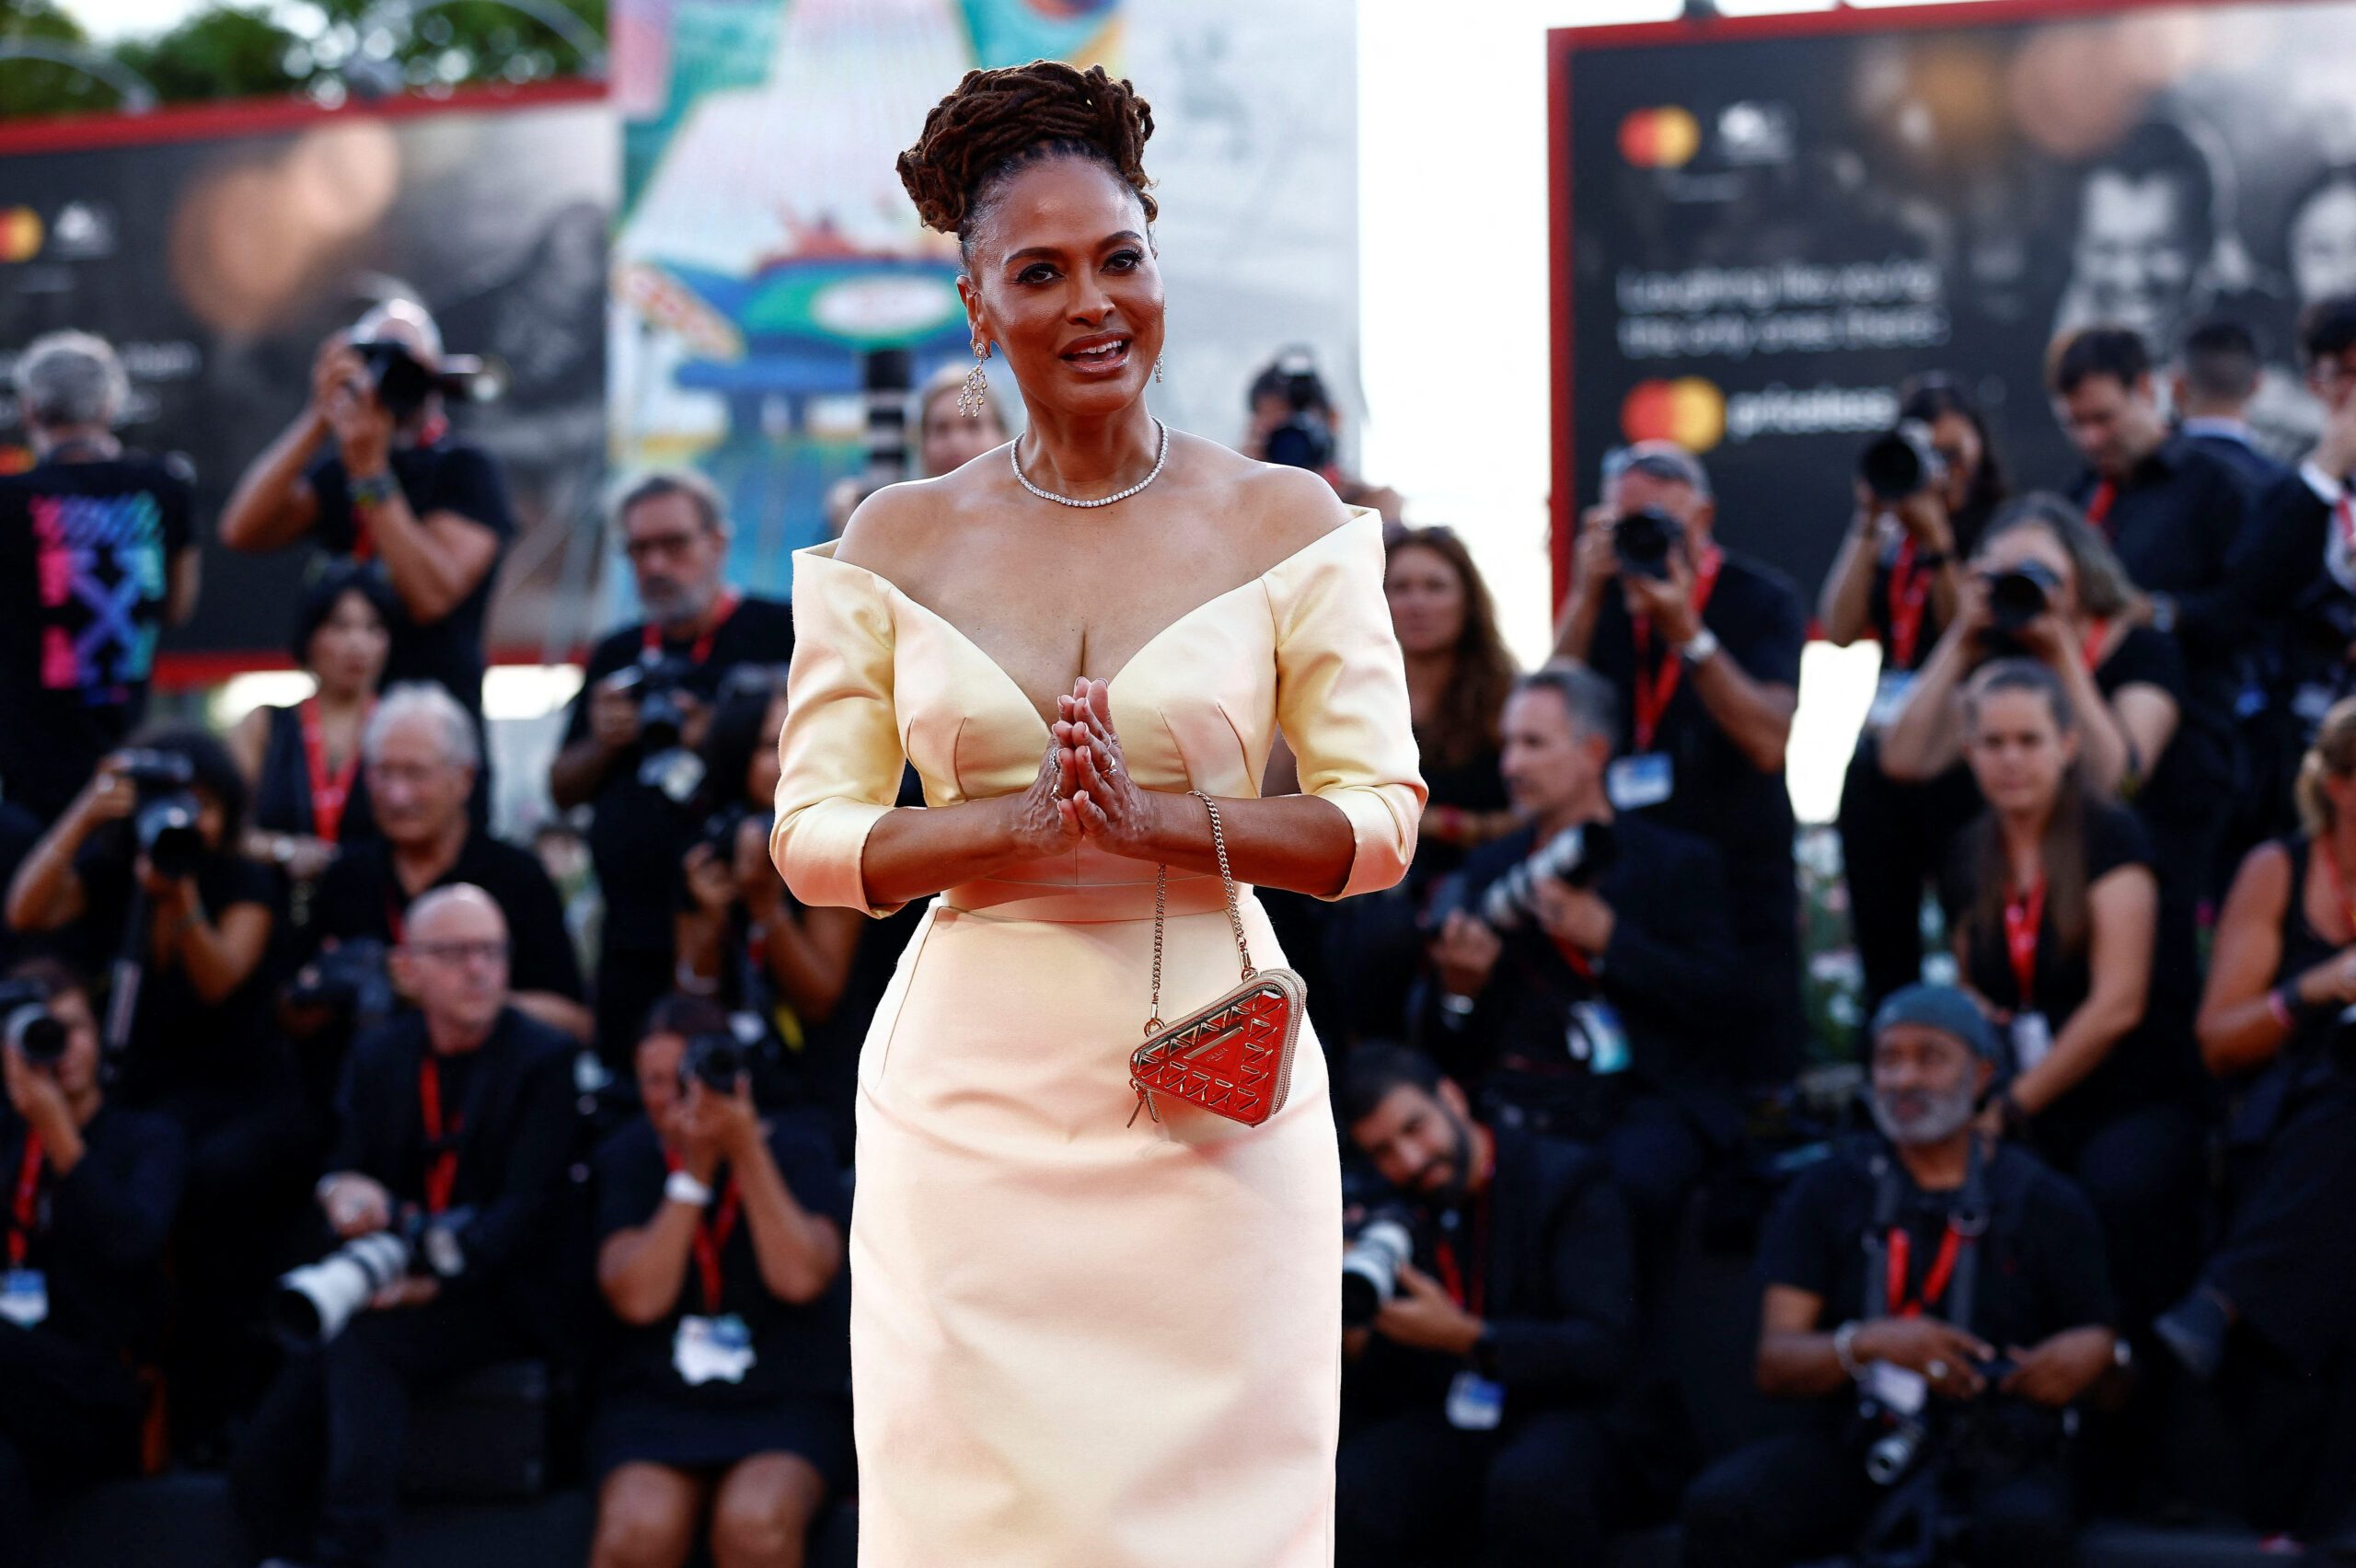 Ava DuVernay makes history with Venice premiere of ‘Origin’